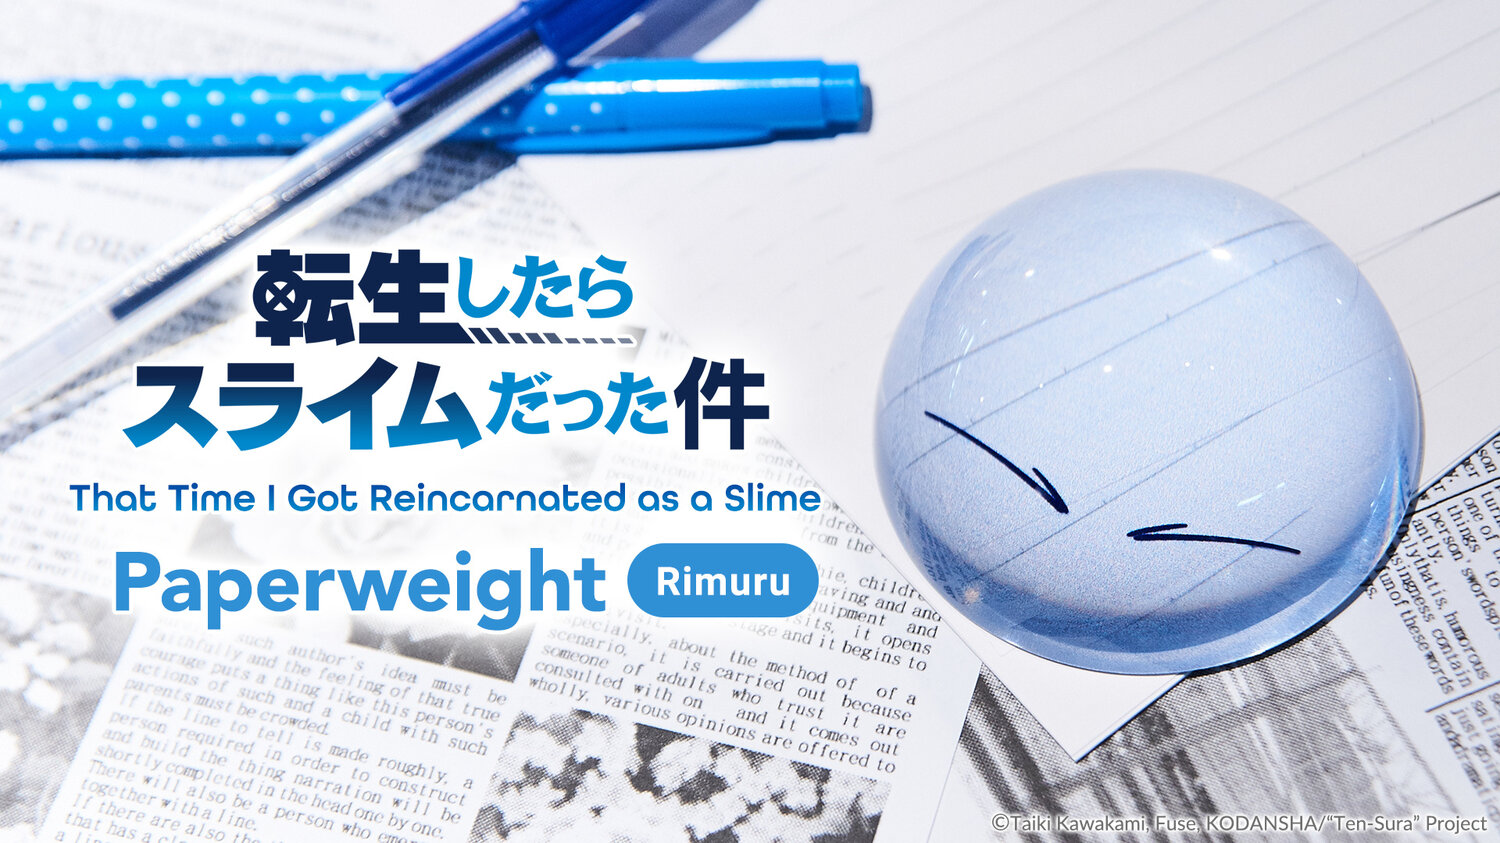 That Time I Got Reincarnated as a Slime Rimuru Paperweight